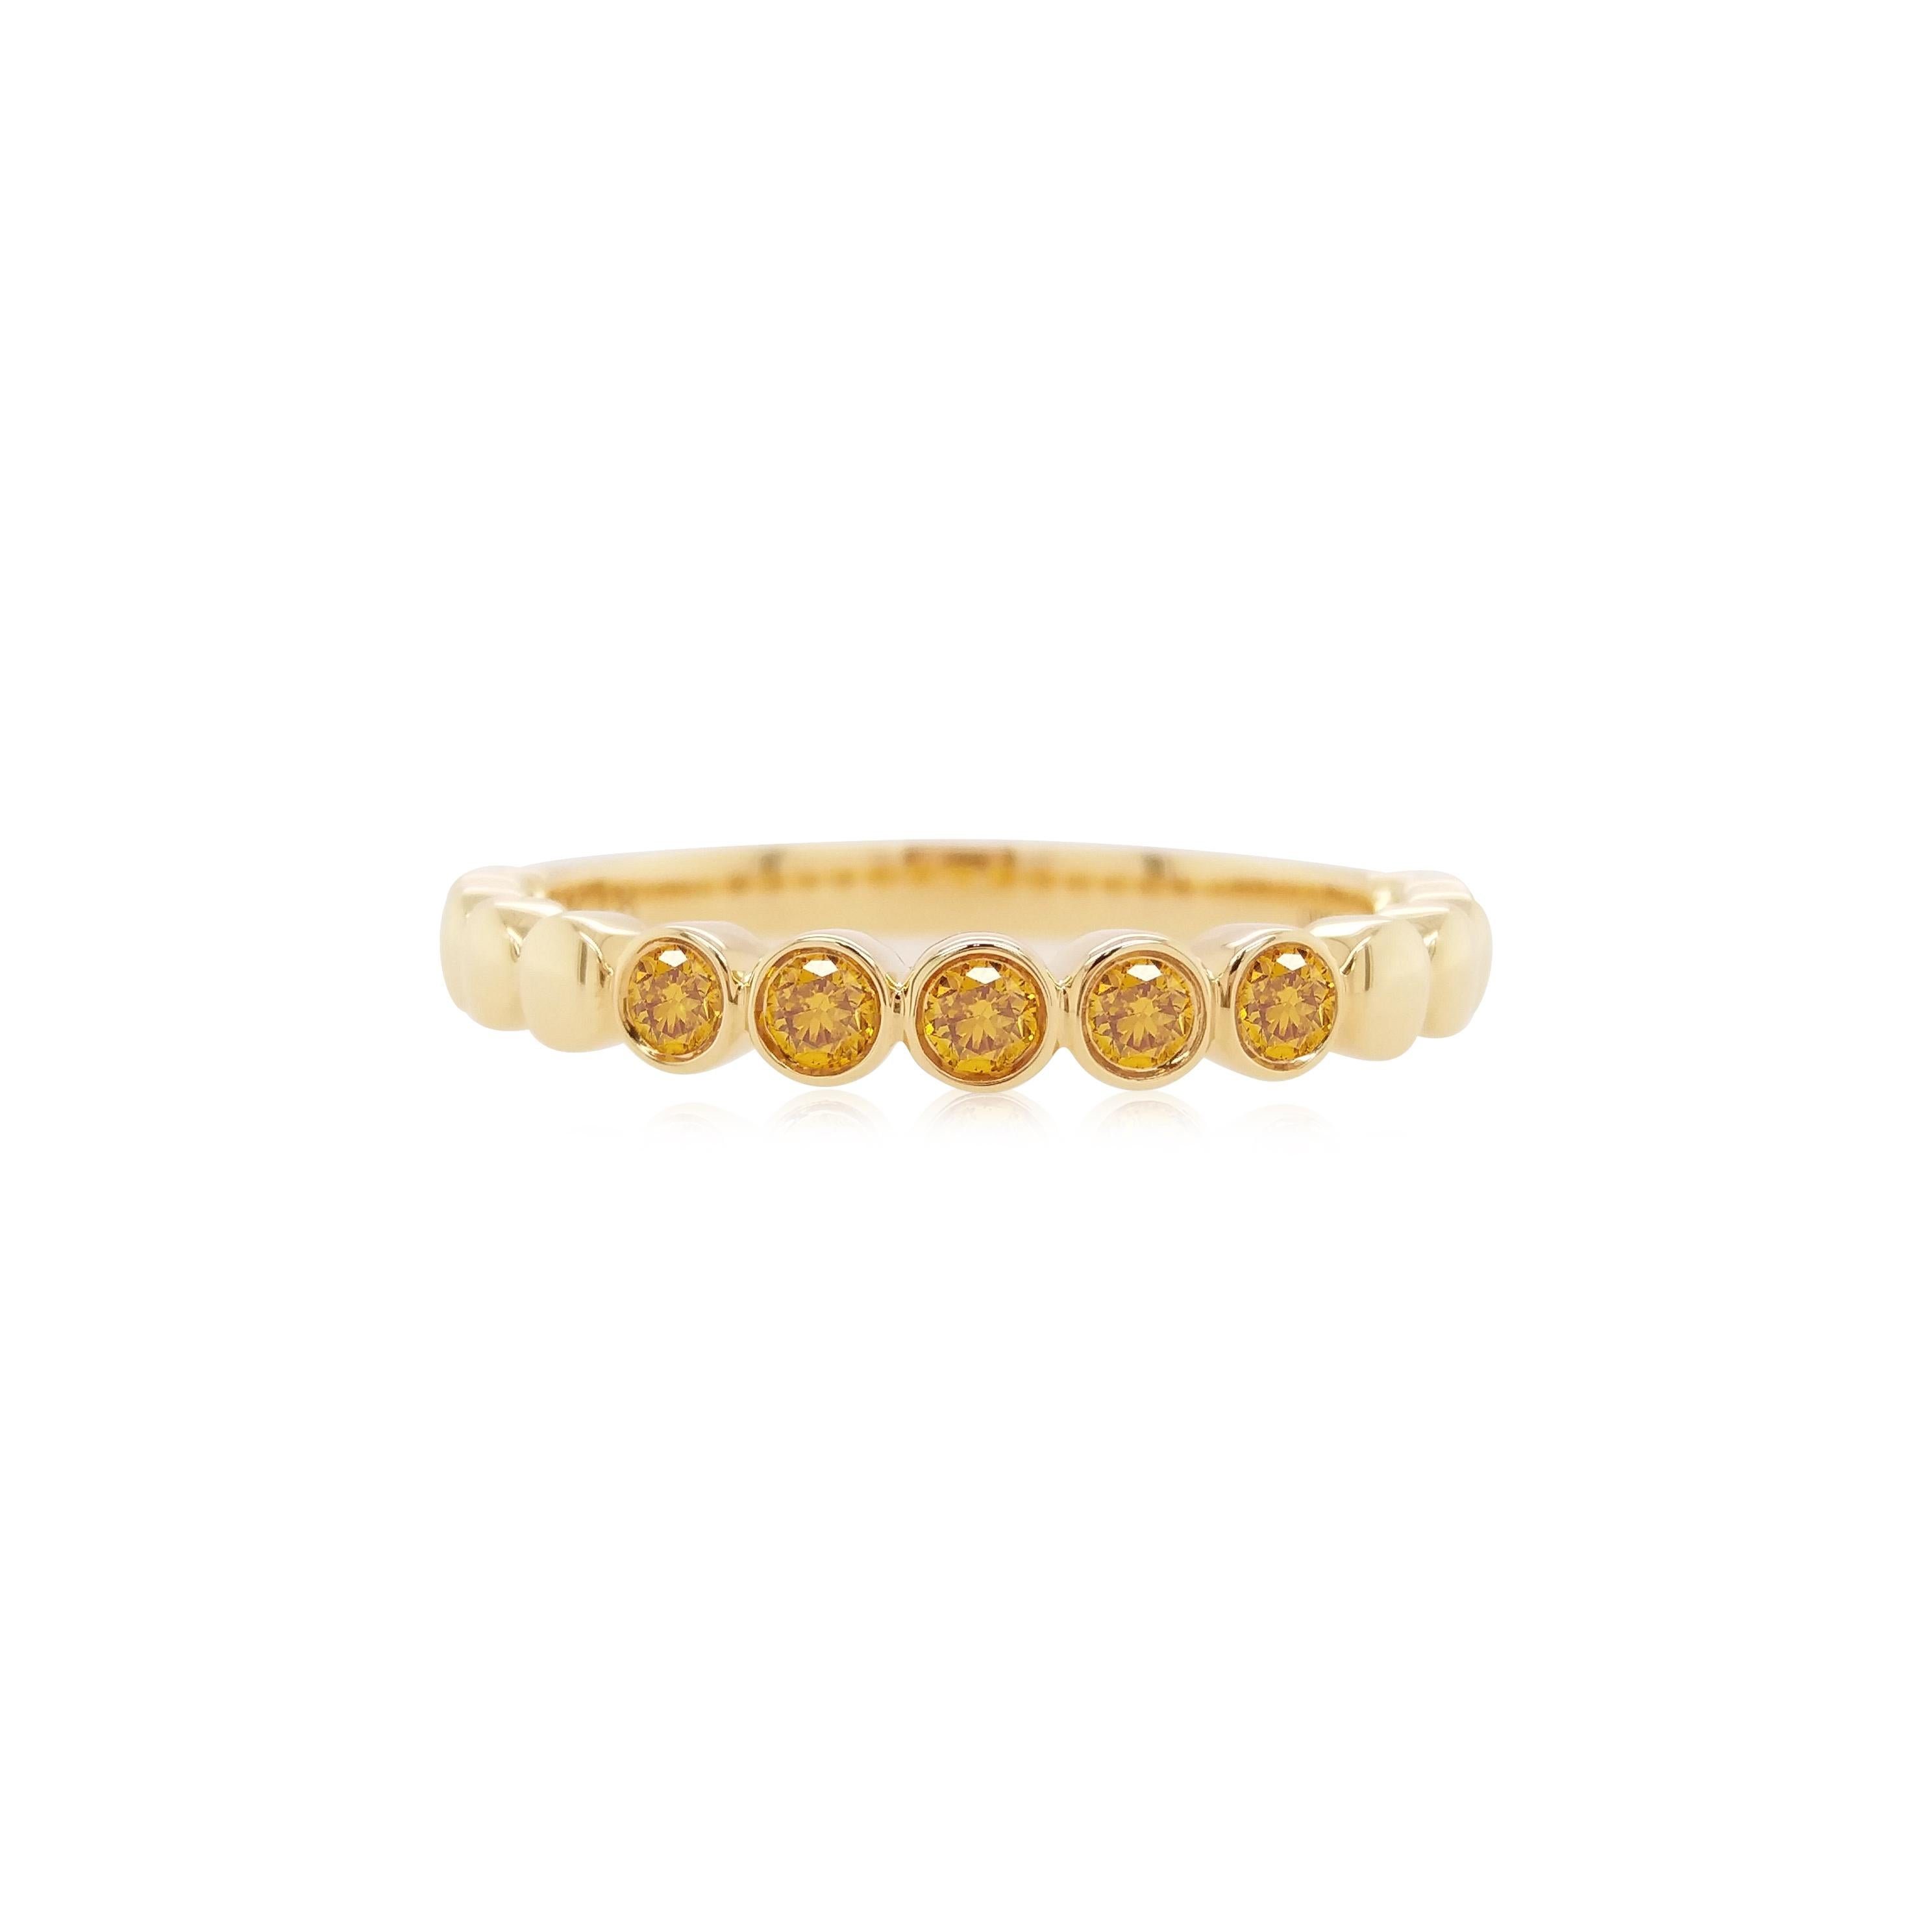 18K Gold ring made with rare and natural yellow diamonds with beautiful luster and fire, a special ring for your loved one.

Yellow Diamonds- 0.18 cts

HYT Jewelry is a privately owned company headquartered in Hong Kong, with branches in Tokyo, New